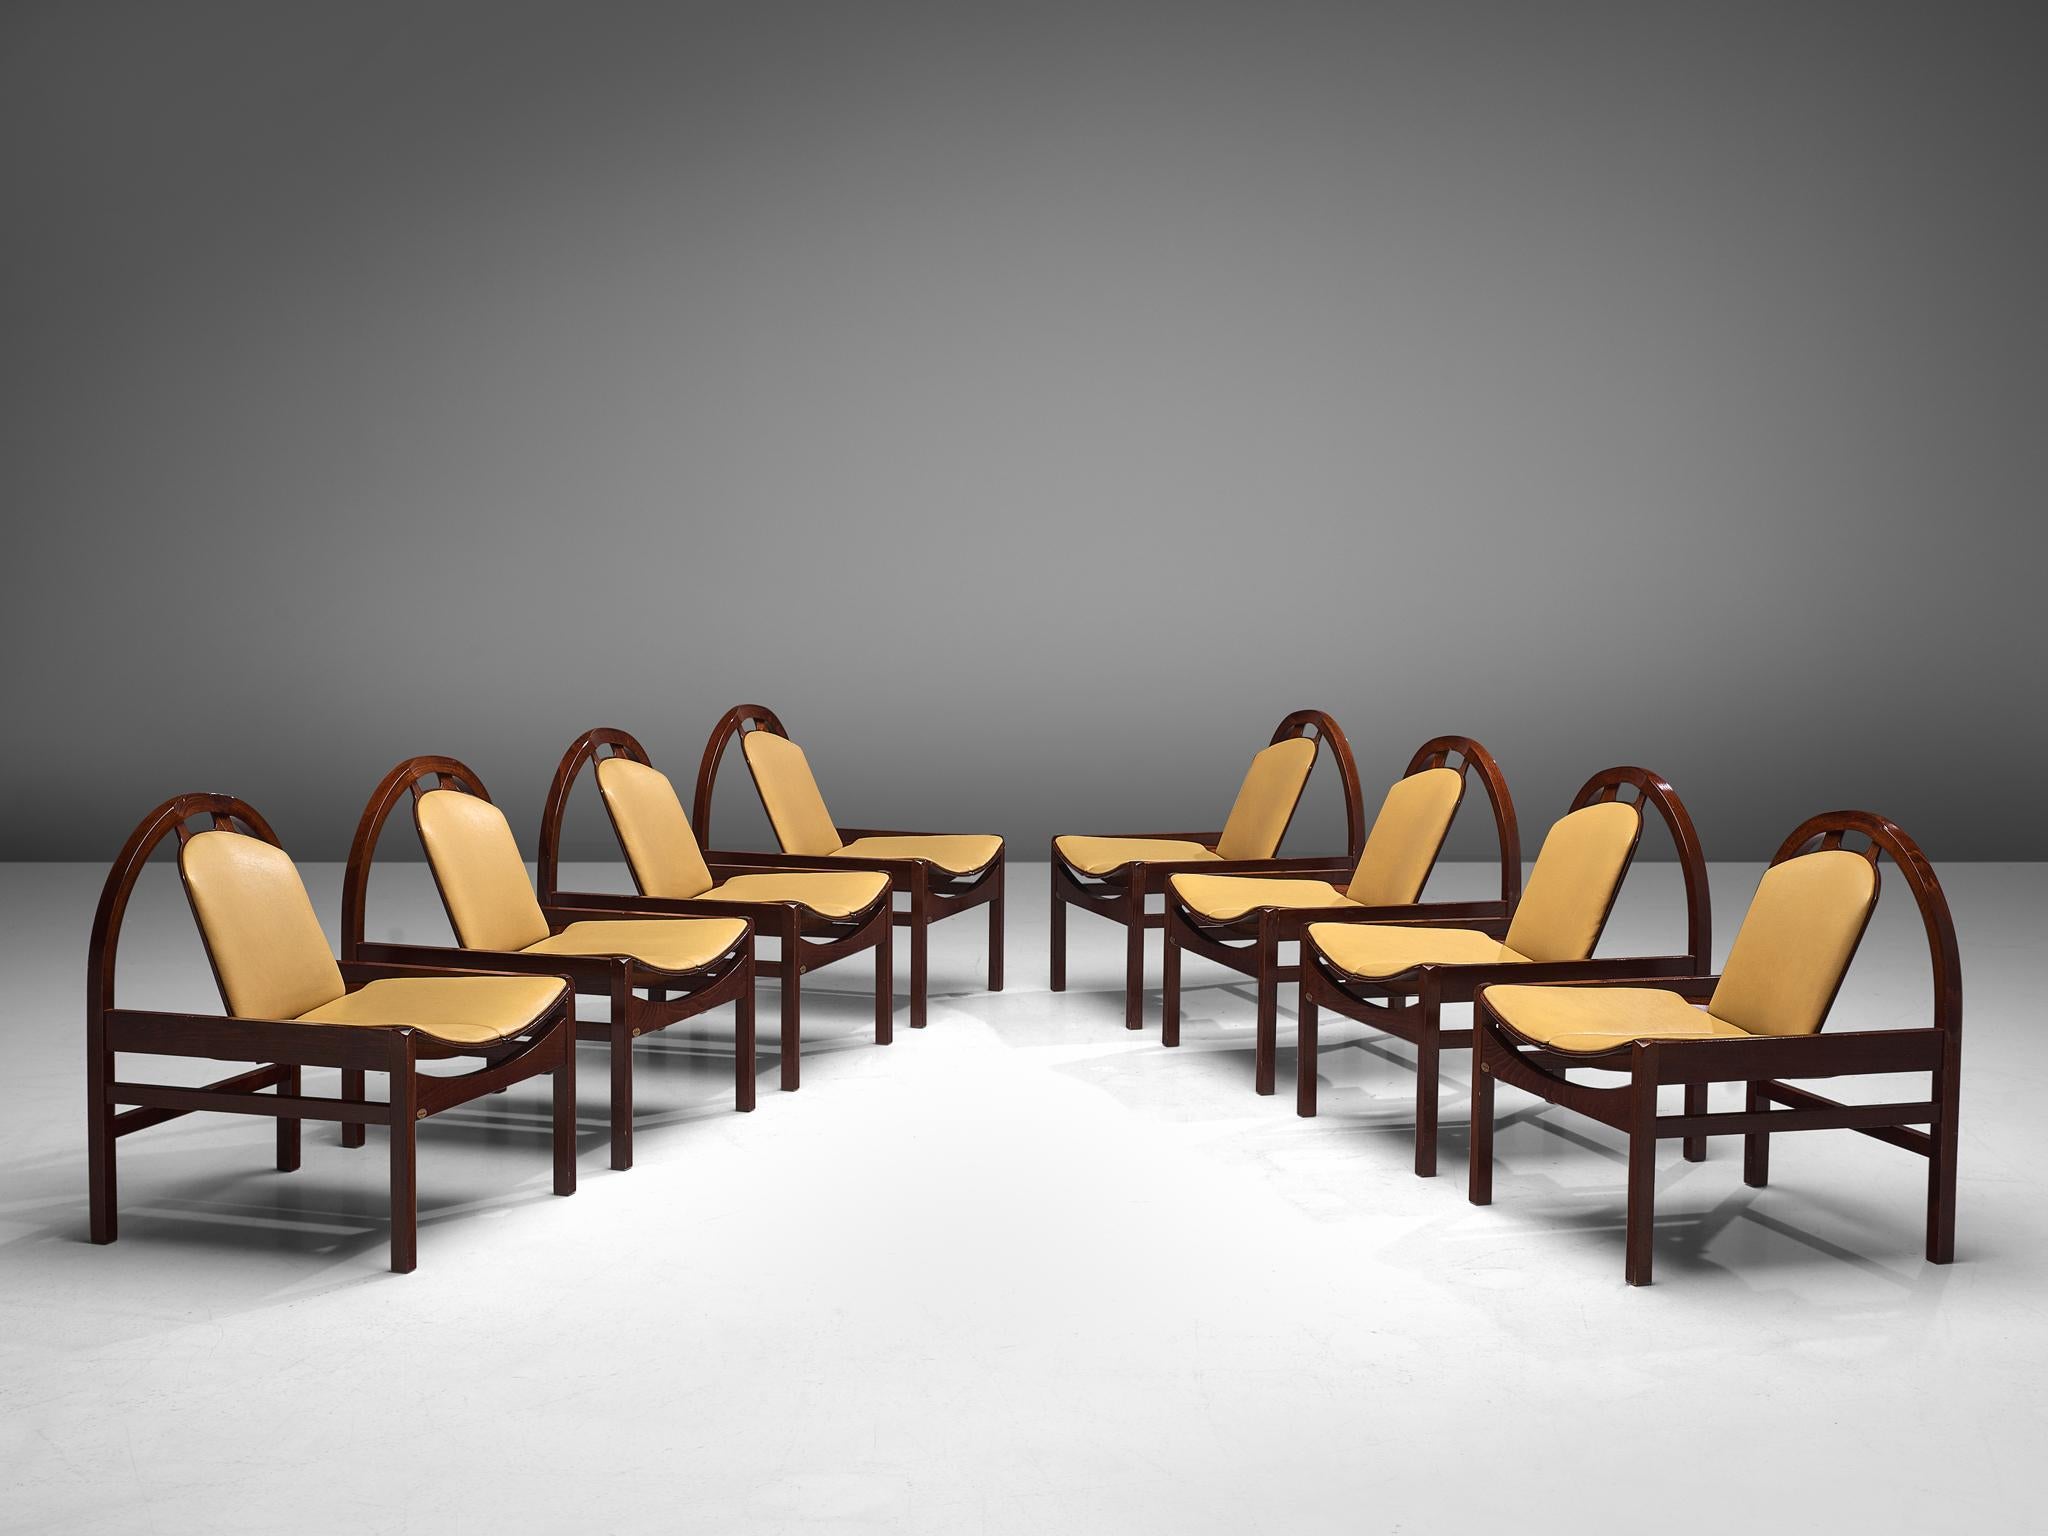 Baumann, set of eight 'Argos' easy chairs, beech and leather, France, 1970s

These Argos lounge chairs are manufactured by Baumann in France. The chairs feature a rounded frame that supports the tilted backrest. The tilted seat is wide and low and